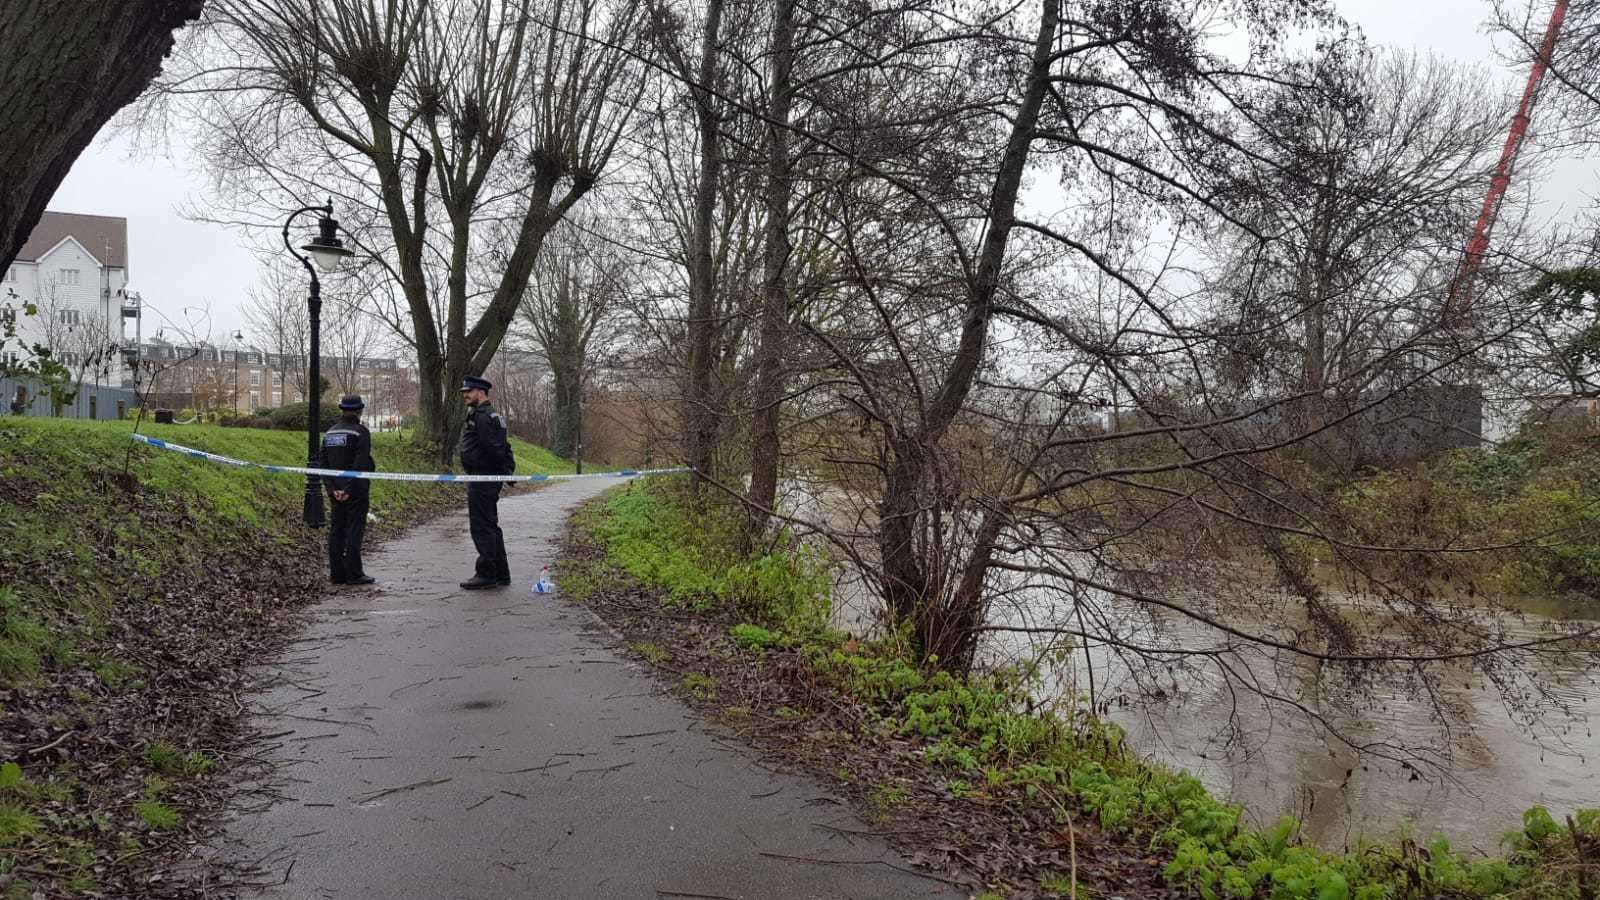 Police taped off a section off path along the River Stour in Canterbury last year